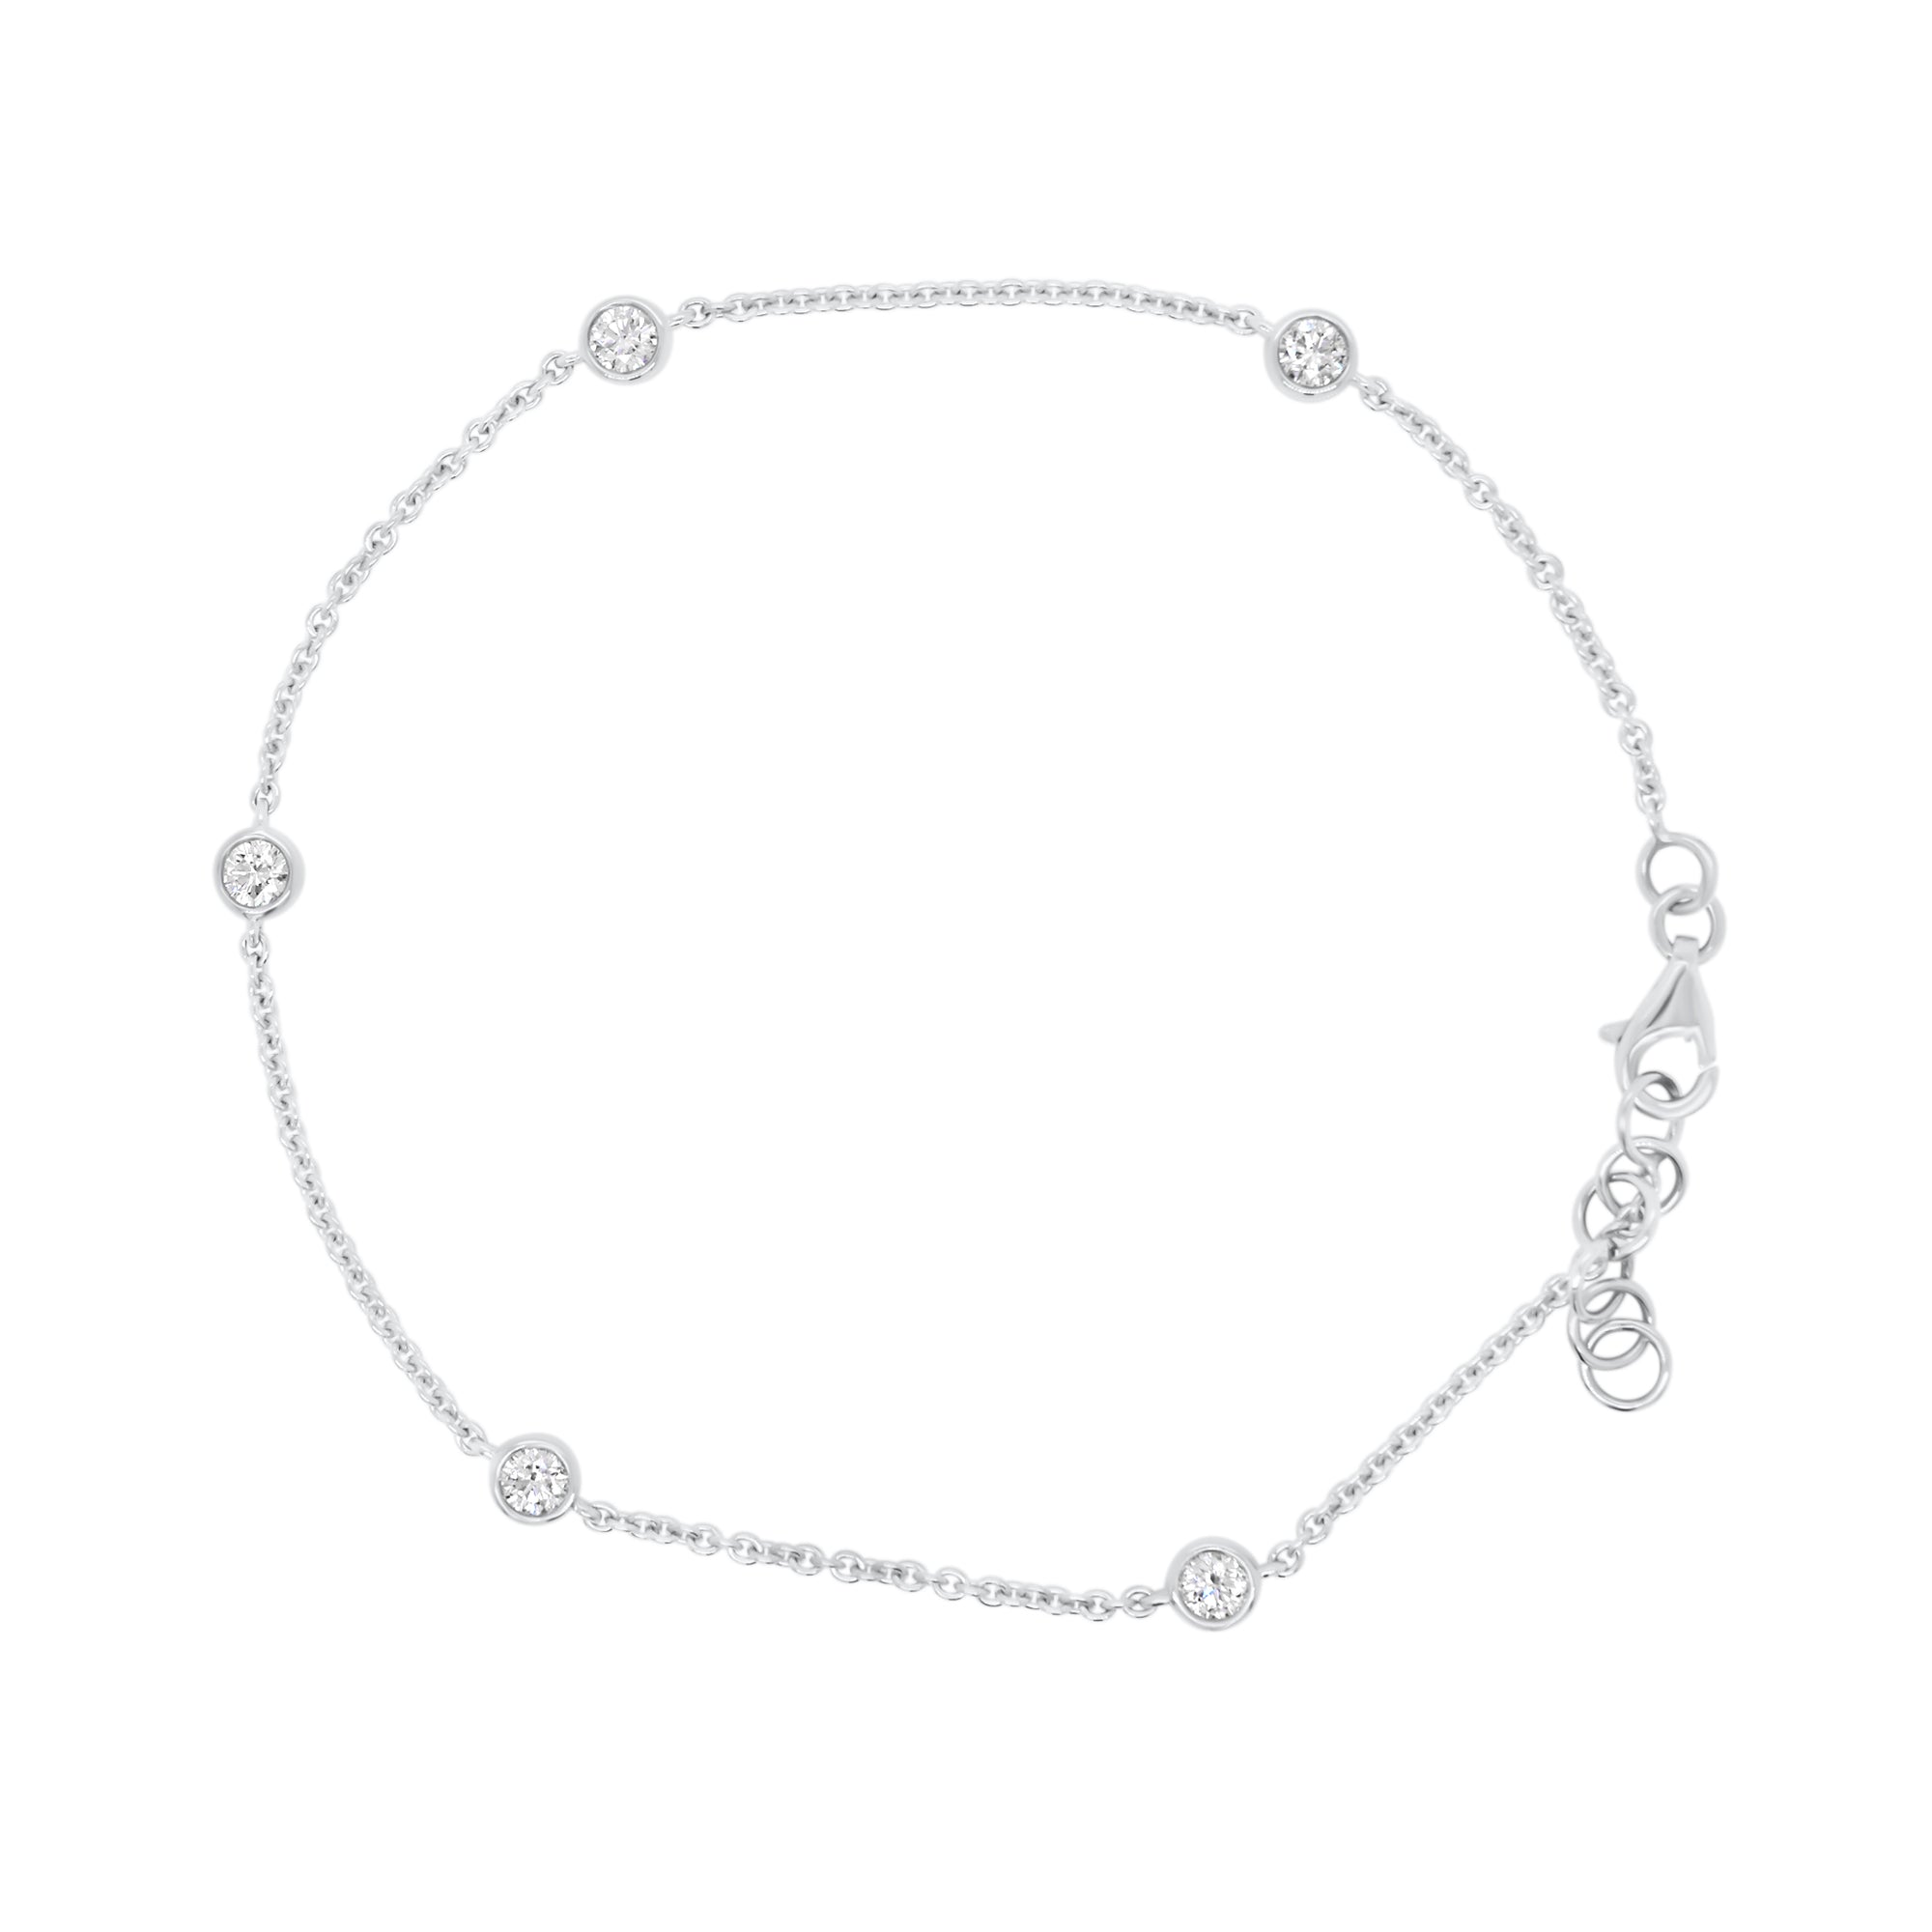 Diamonds by the Yard 5-Stone Bracelet - 18K white gold weighing 2.75 grams - 5 round diamonds totaling 0.49 carats